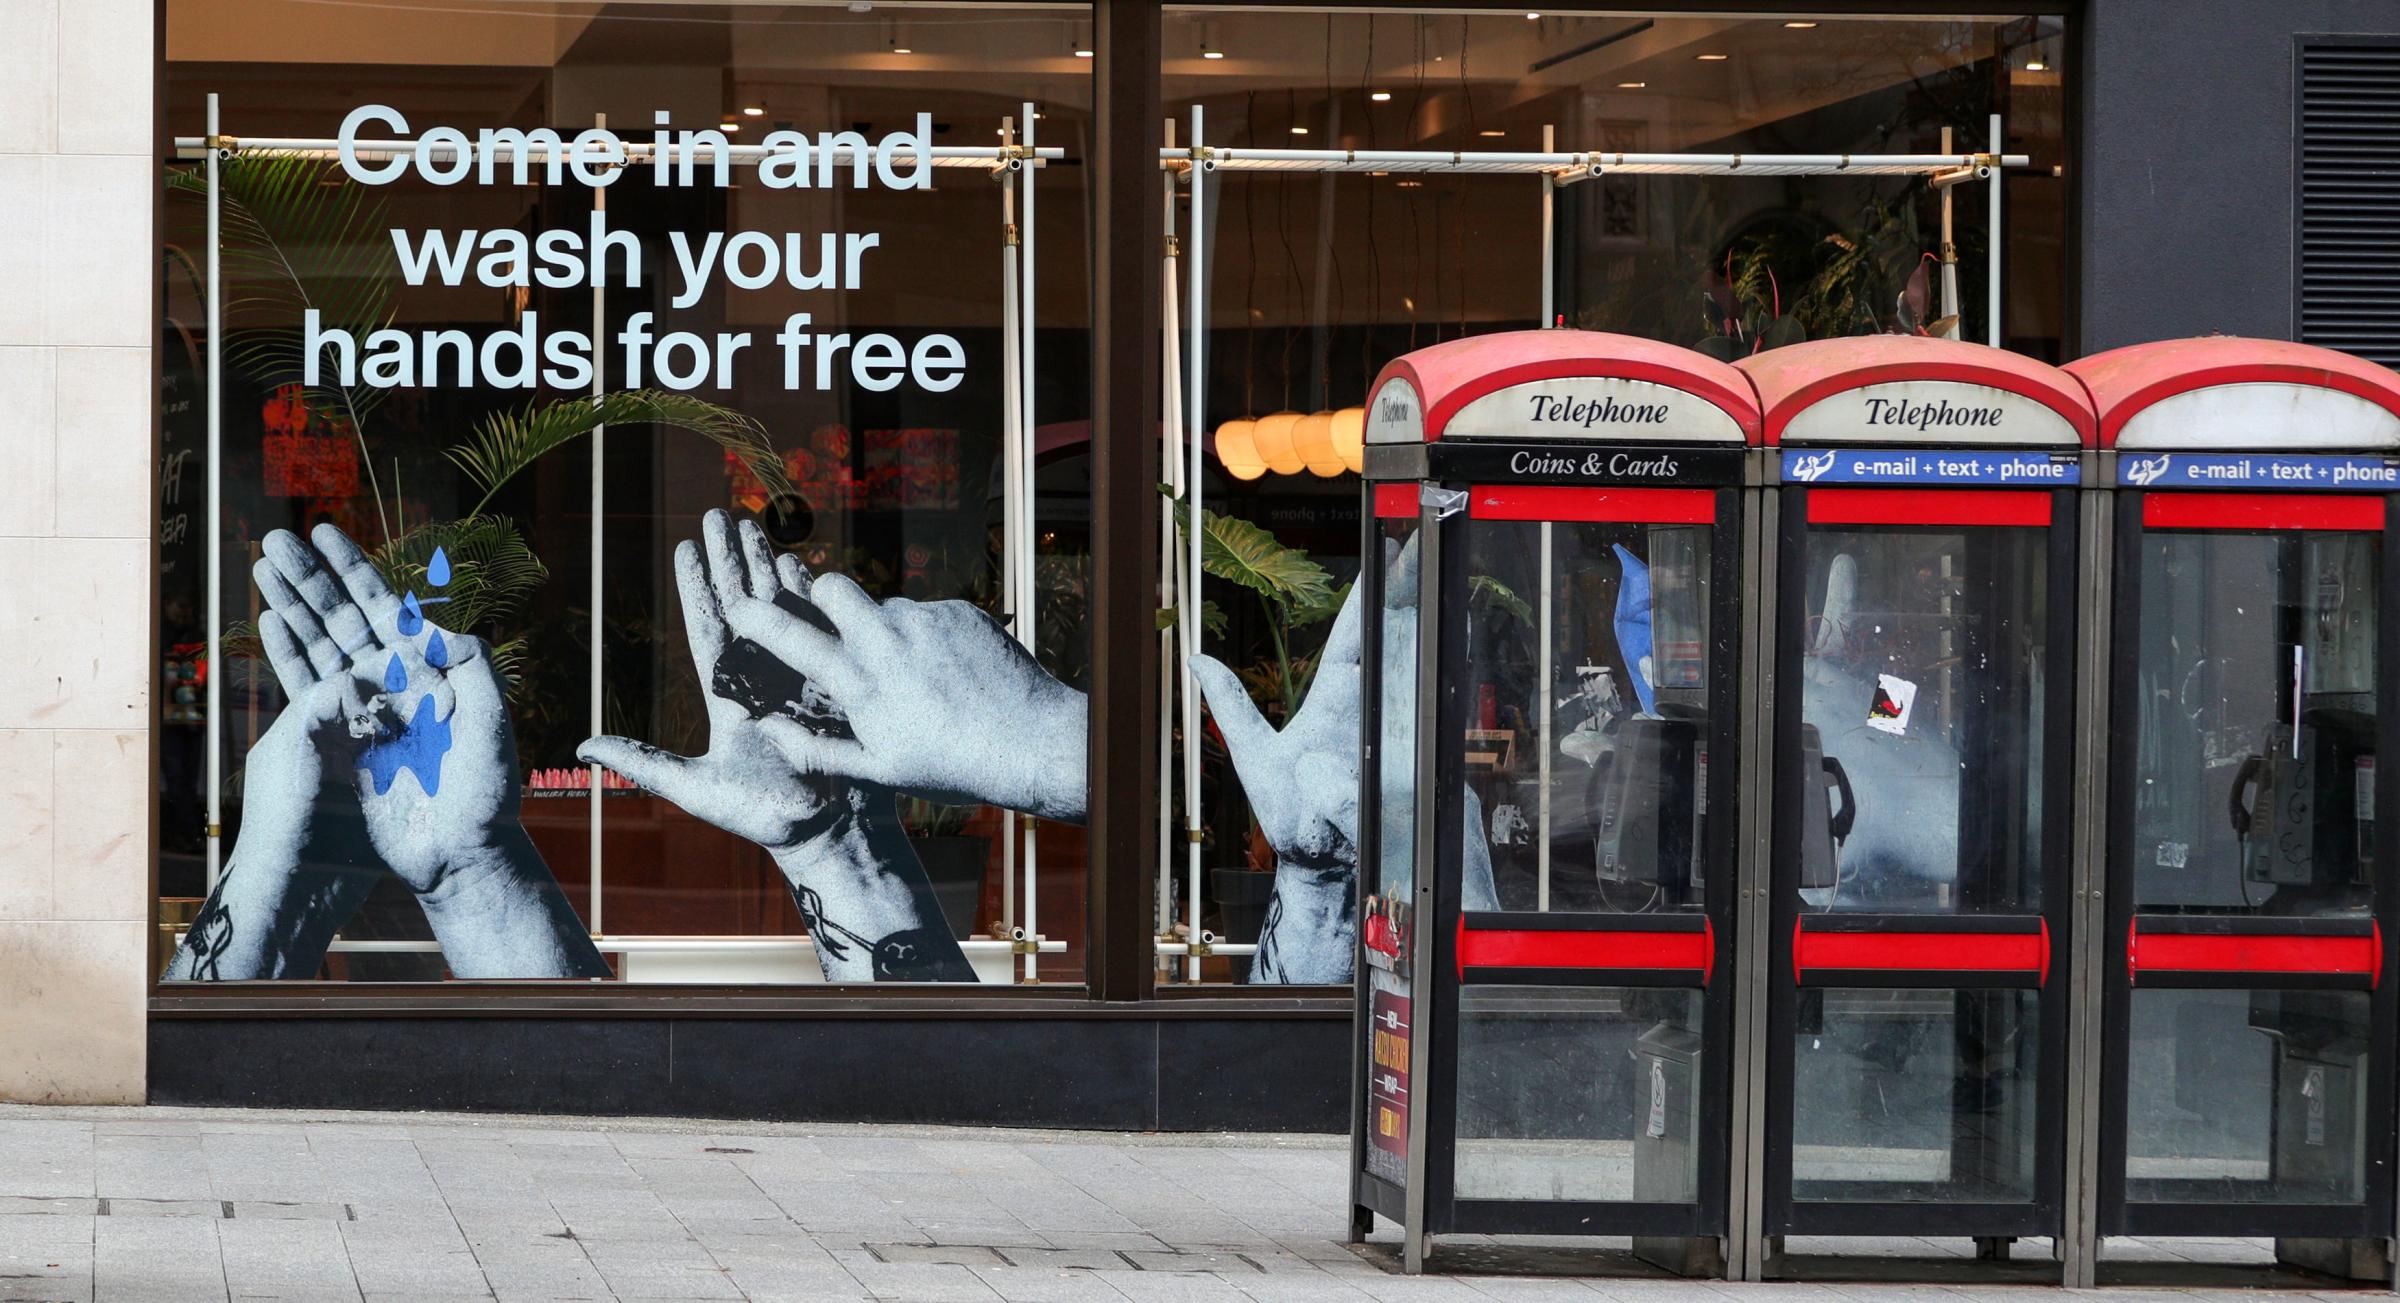 A sign in the window of a Lush store in Liverpool offering a free hand wash service last year